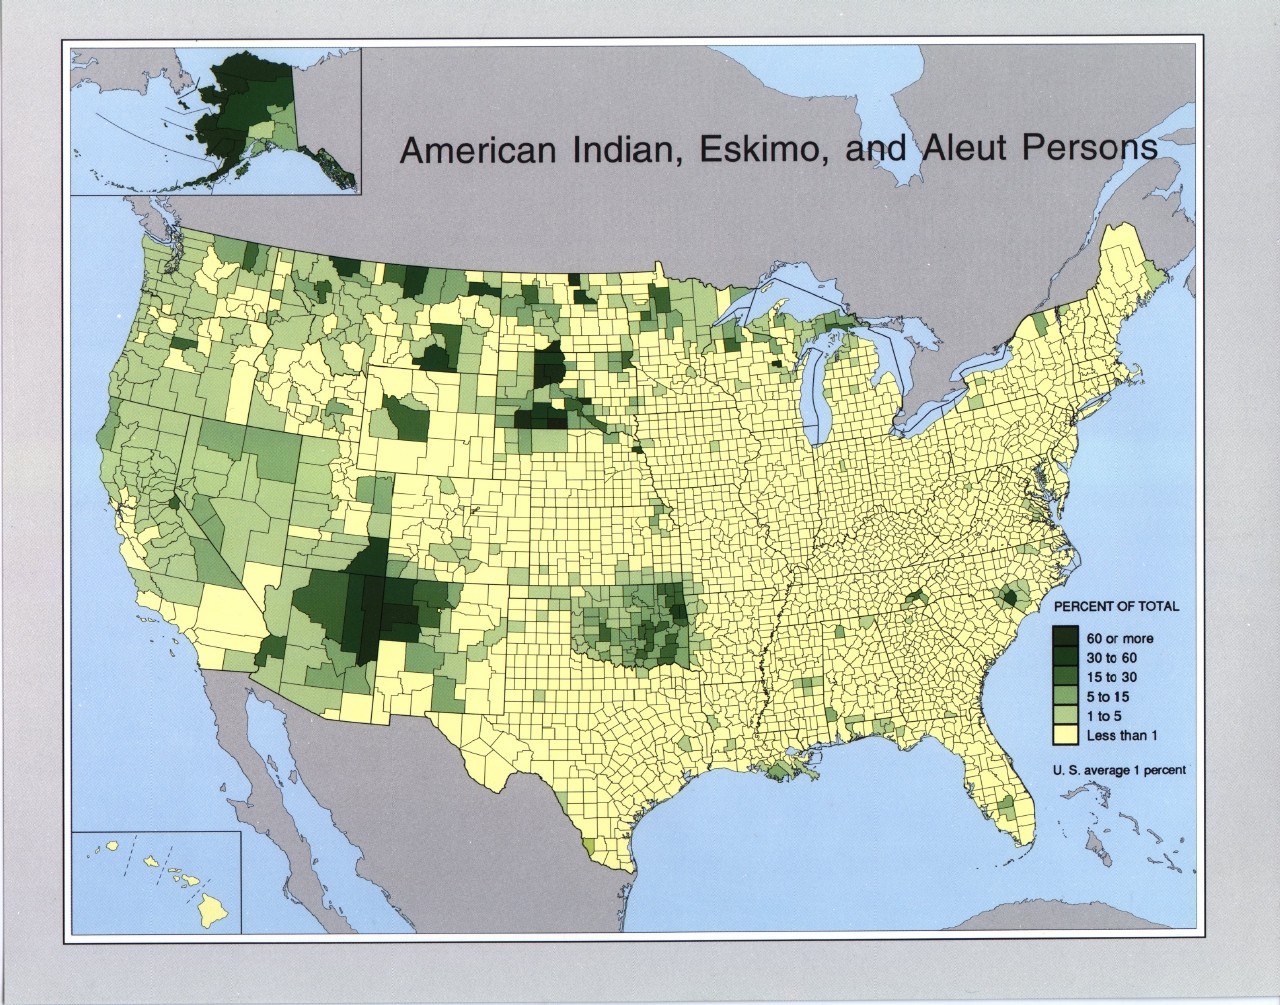 American Indian, Eskimo, and Aleut Persons